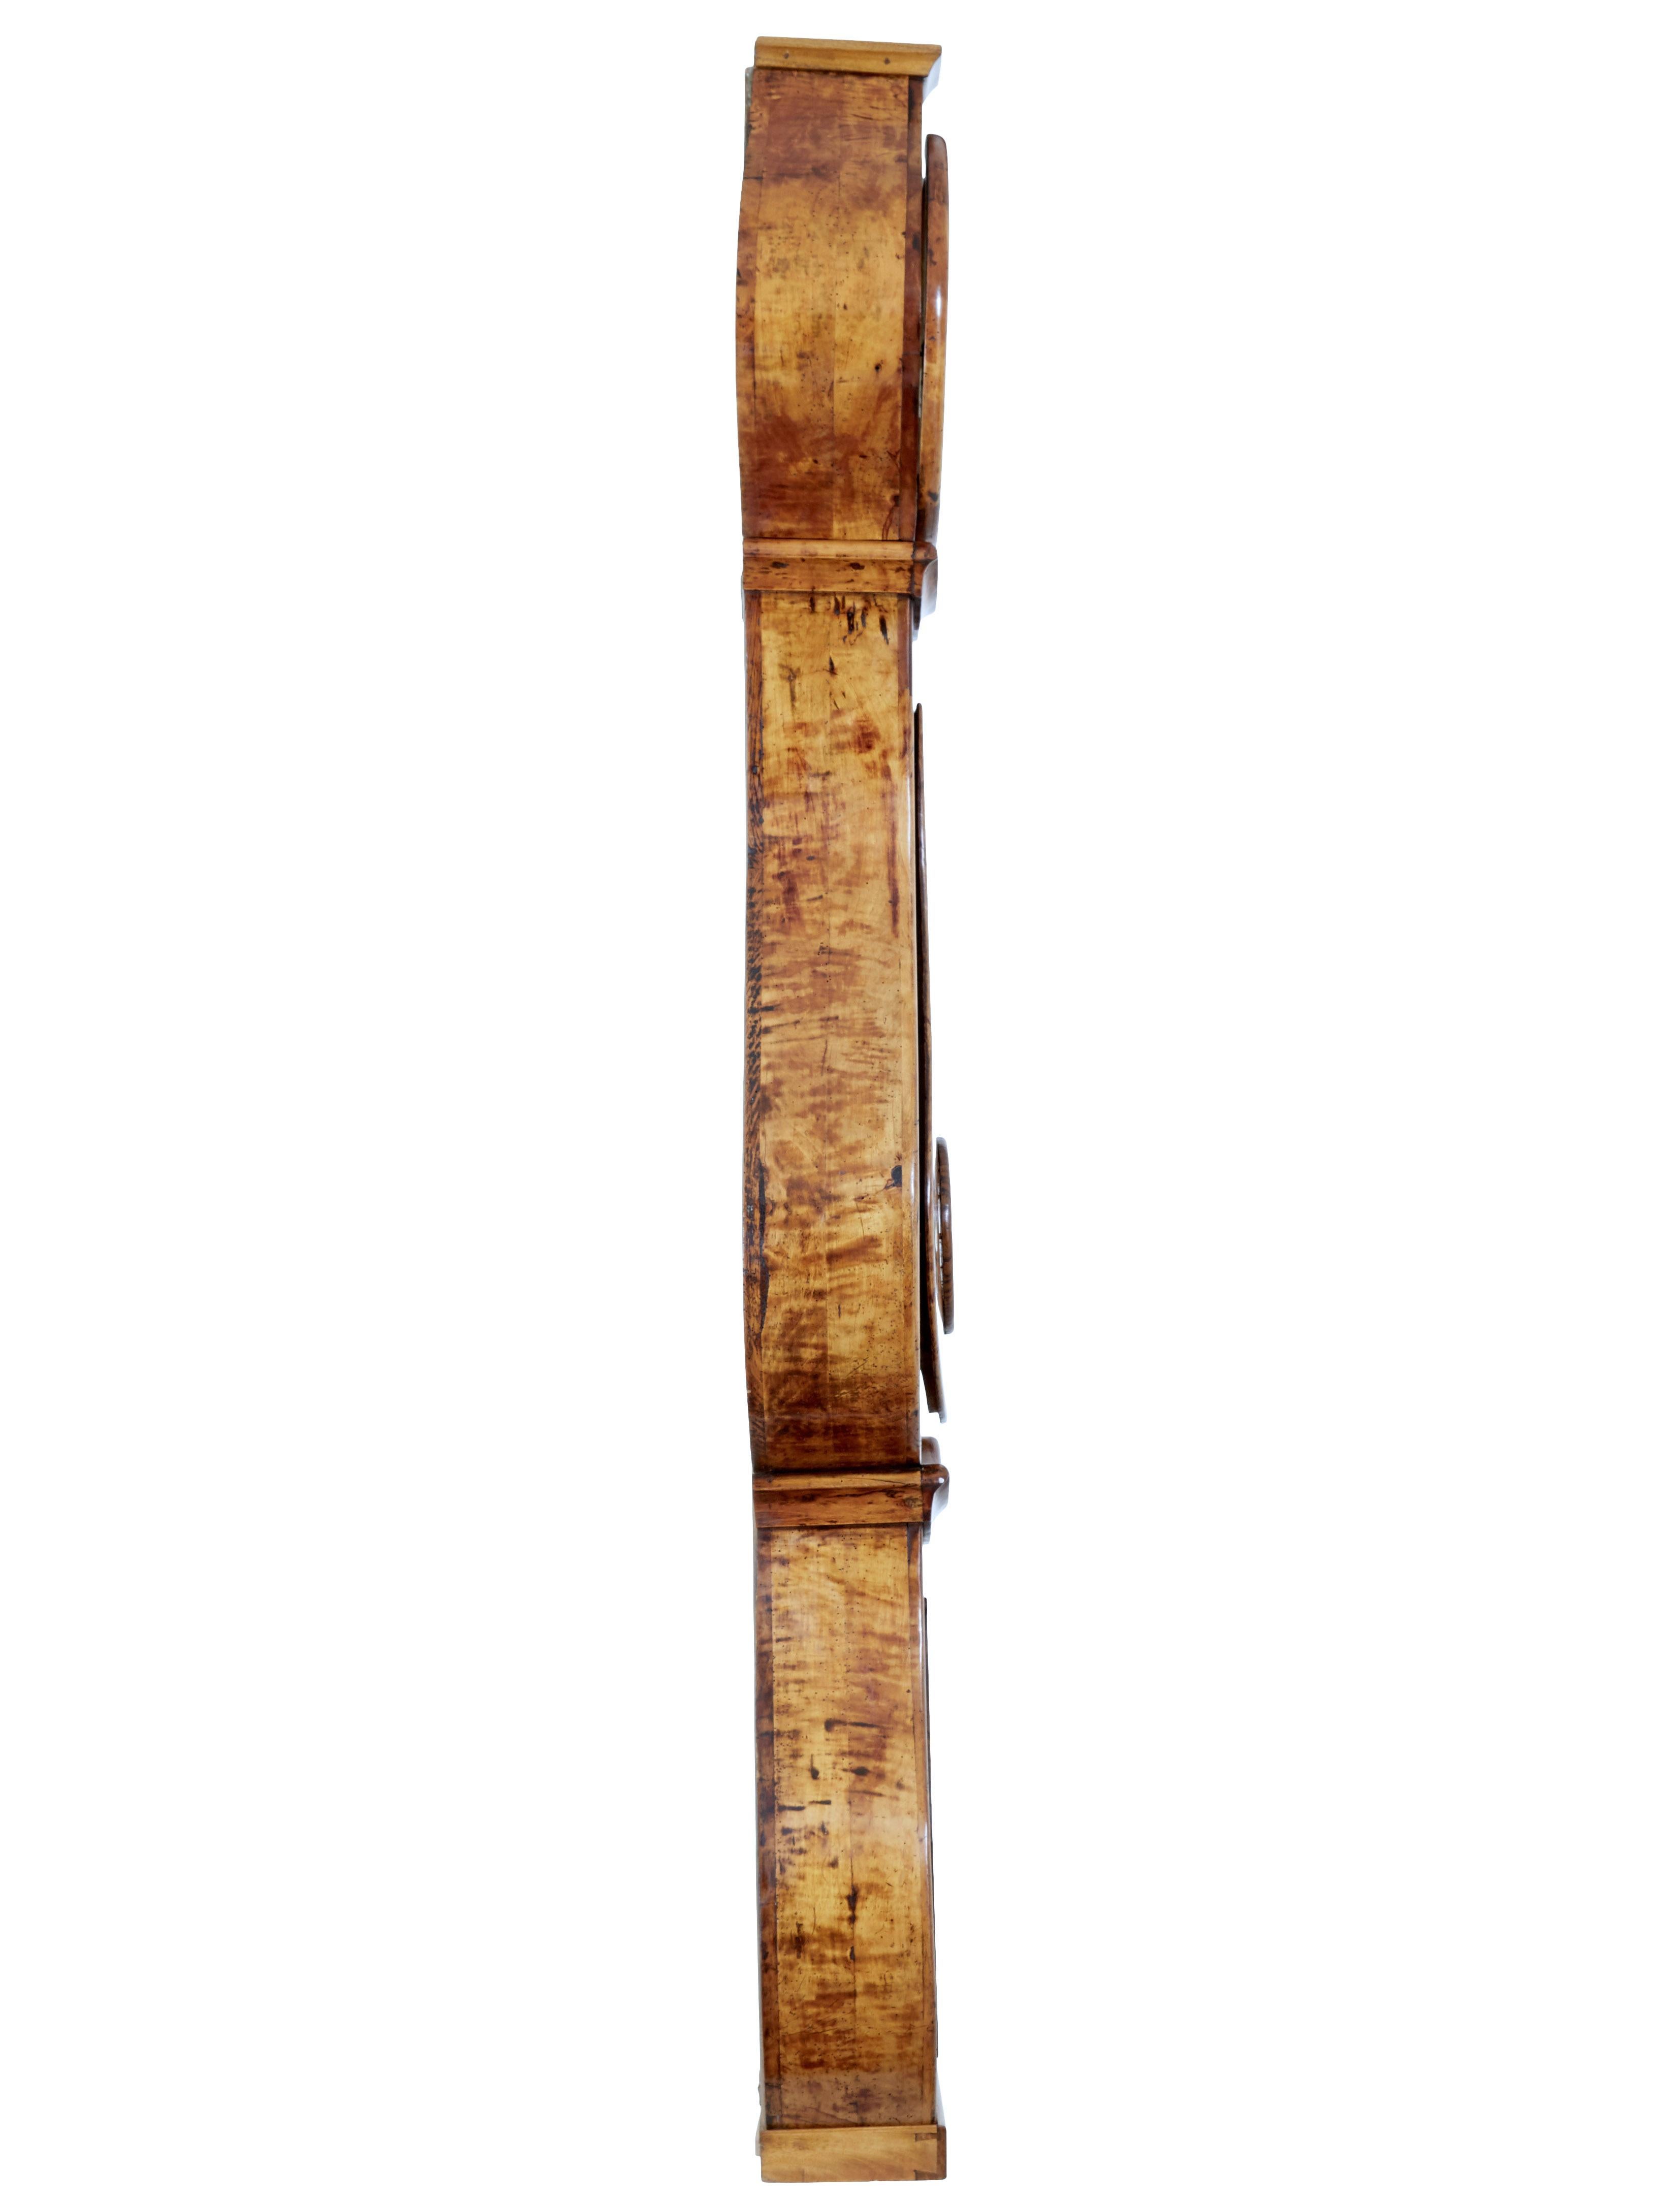 Hand-Carved 19th Century Inlaid Birch Mora Long Case Clock